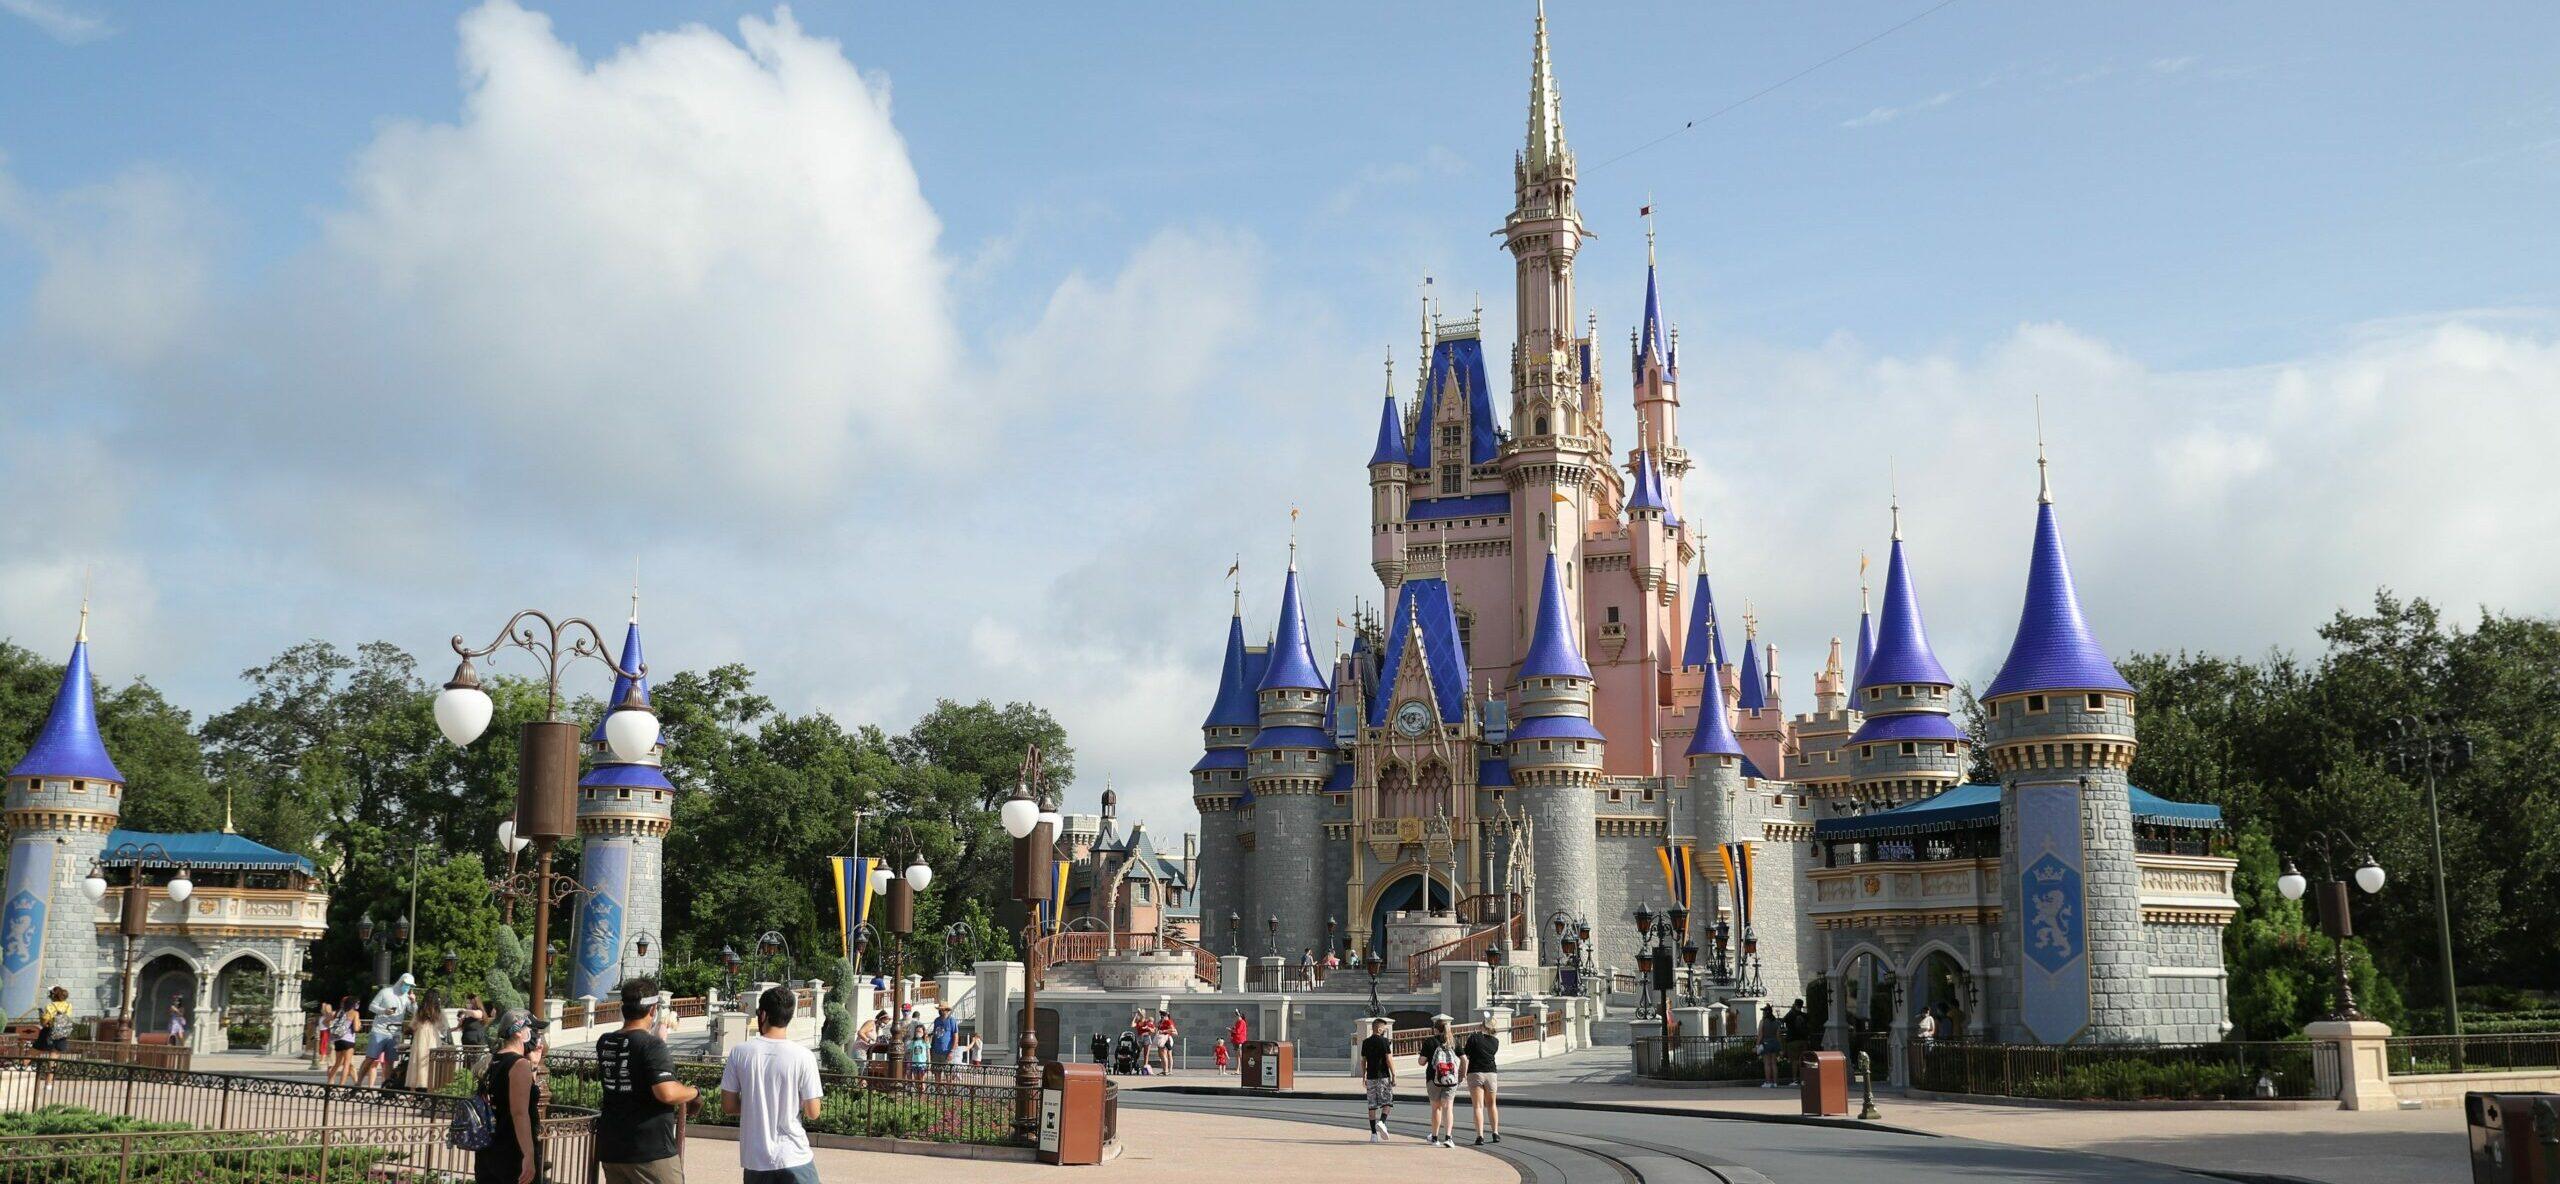 Altercation At Disney World Results In Police Presence